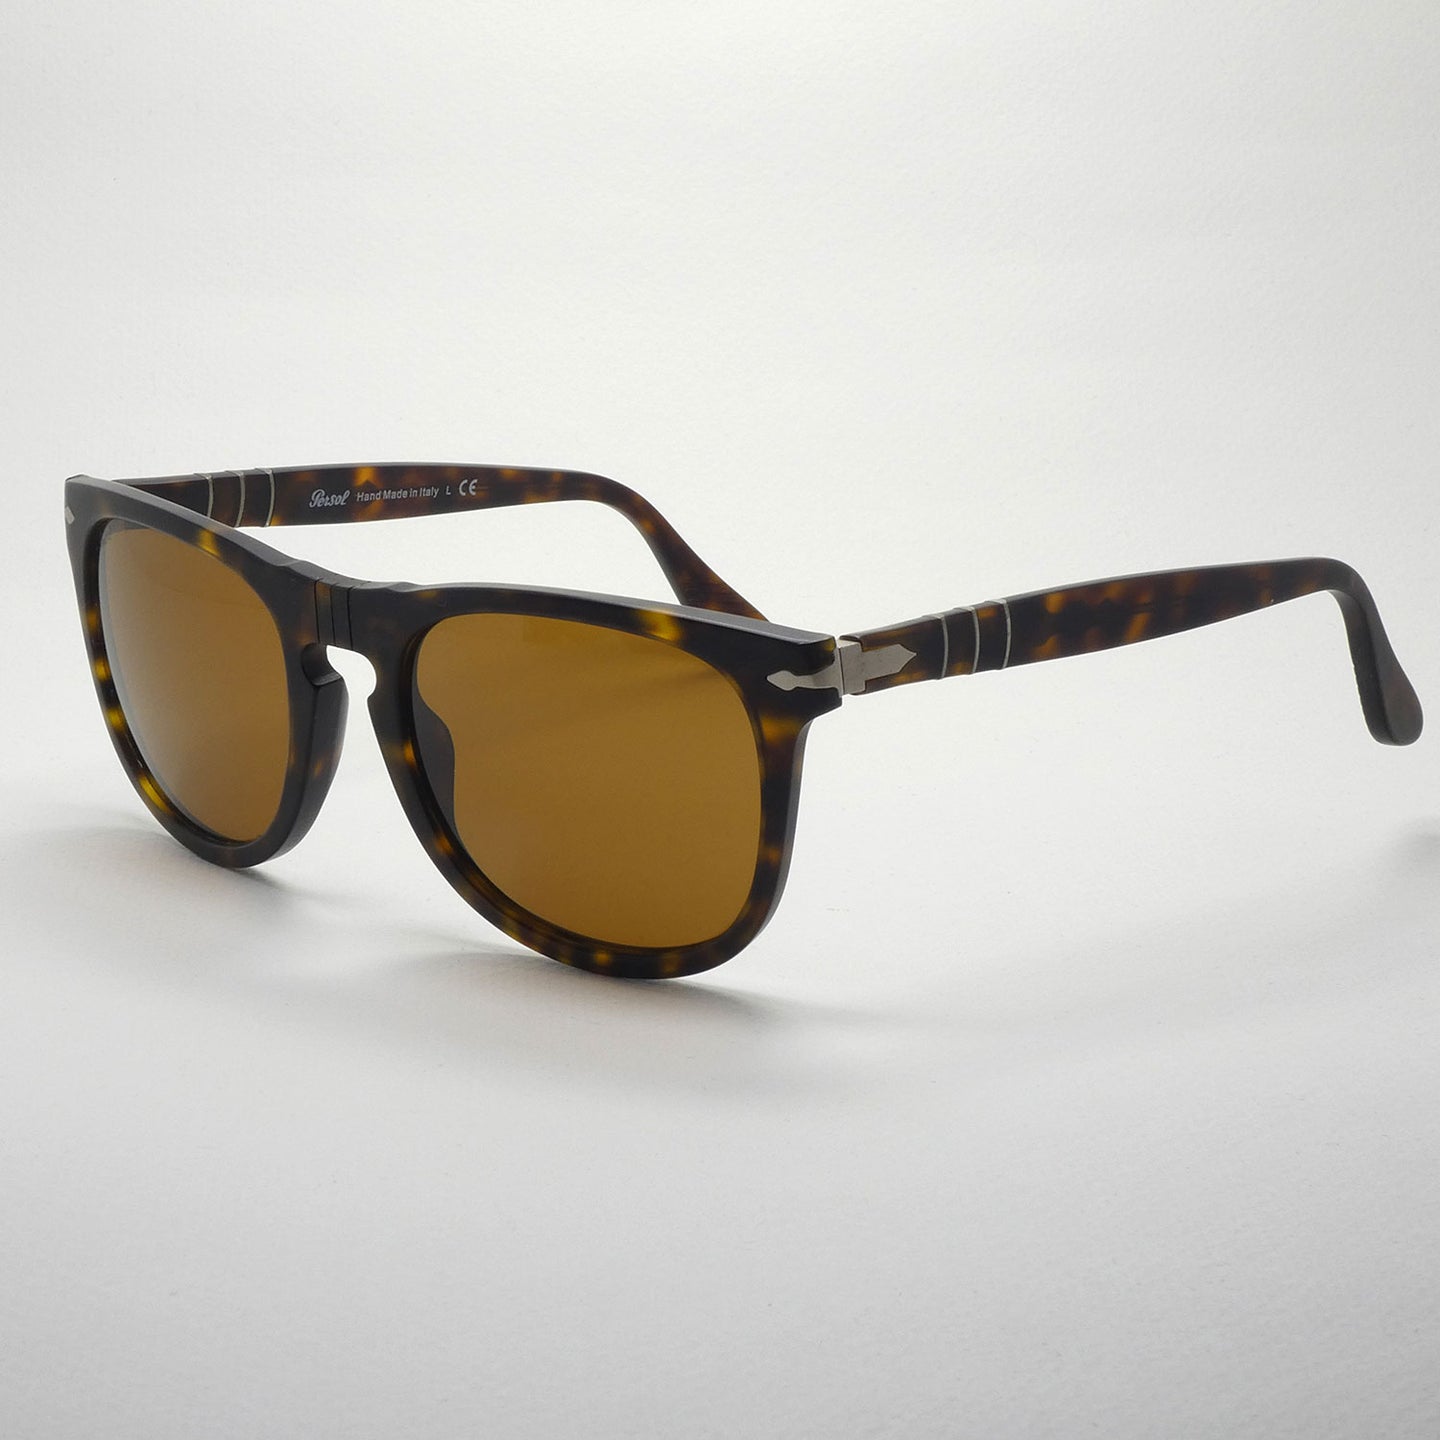 sunglasses persol 3055 899/33  size 54 angled view